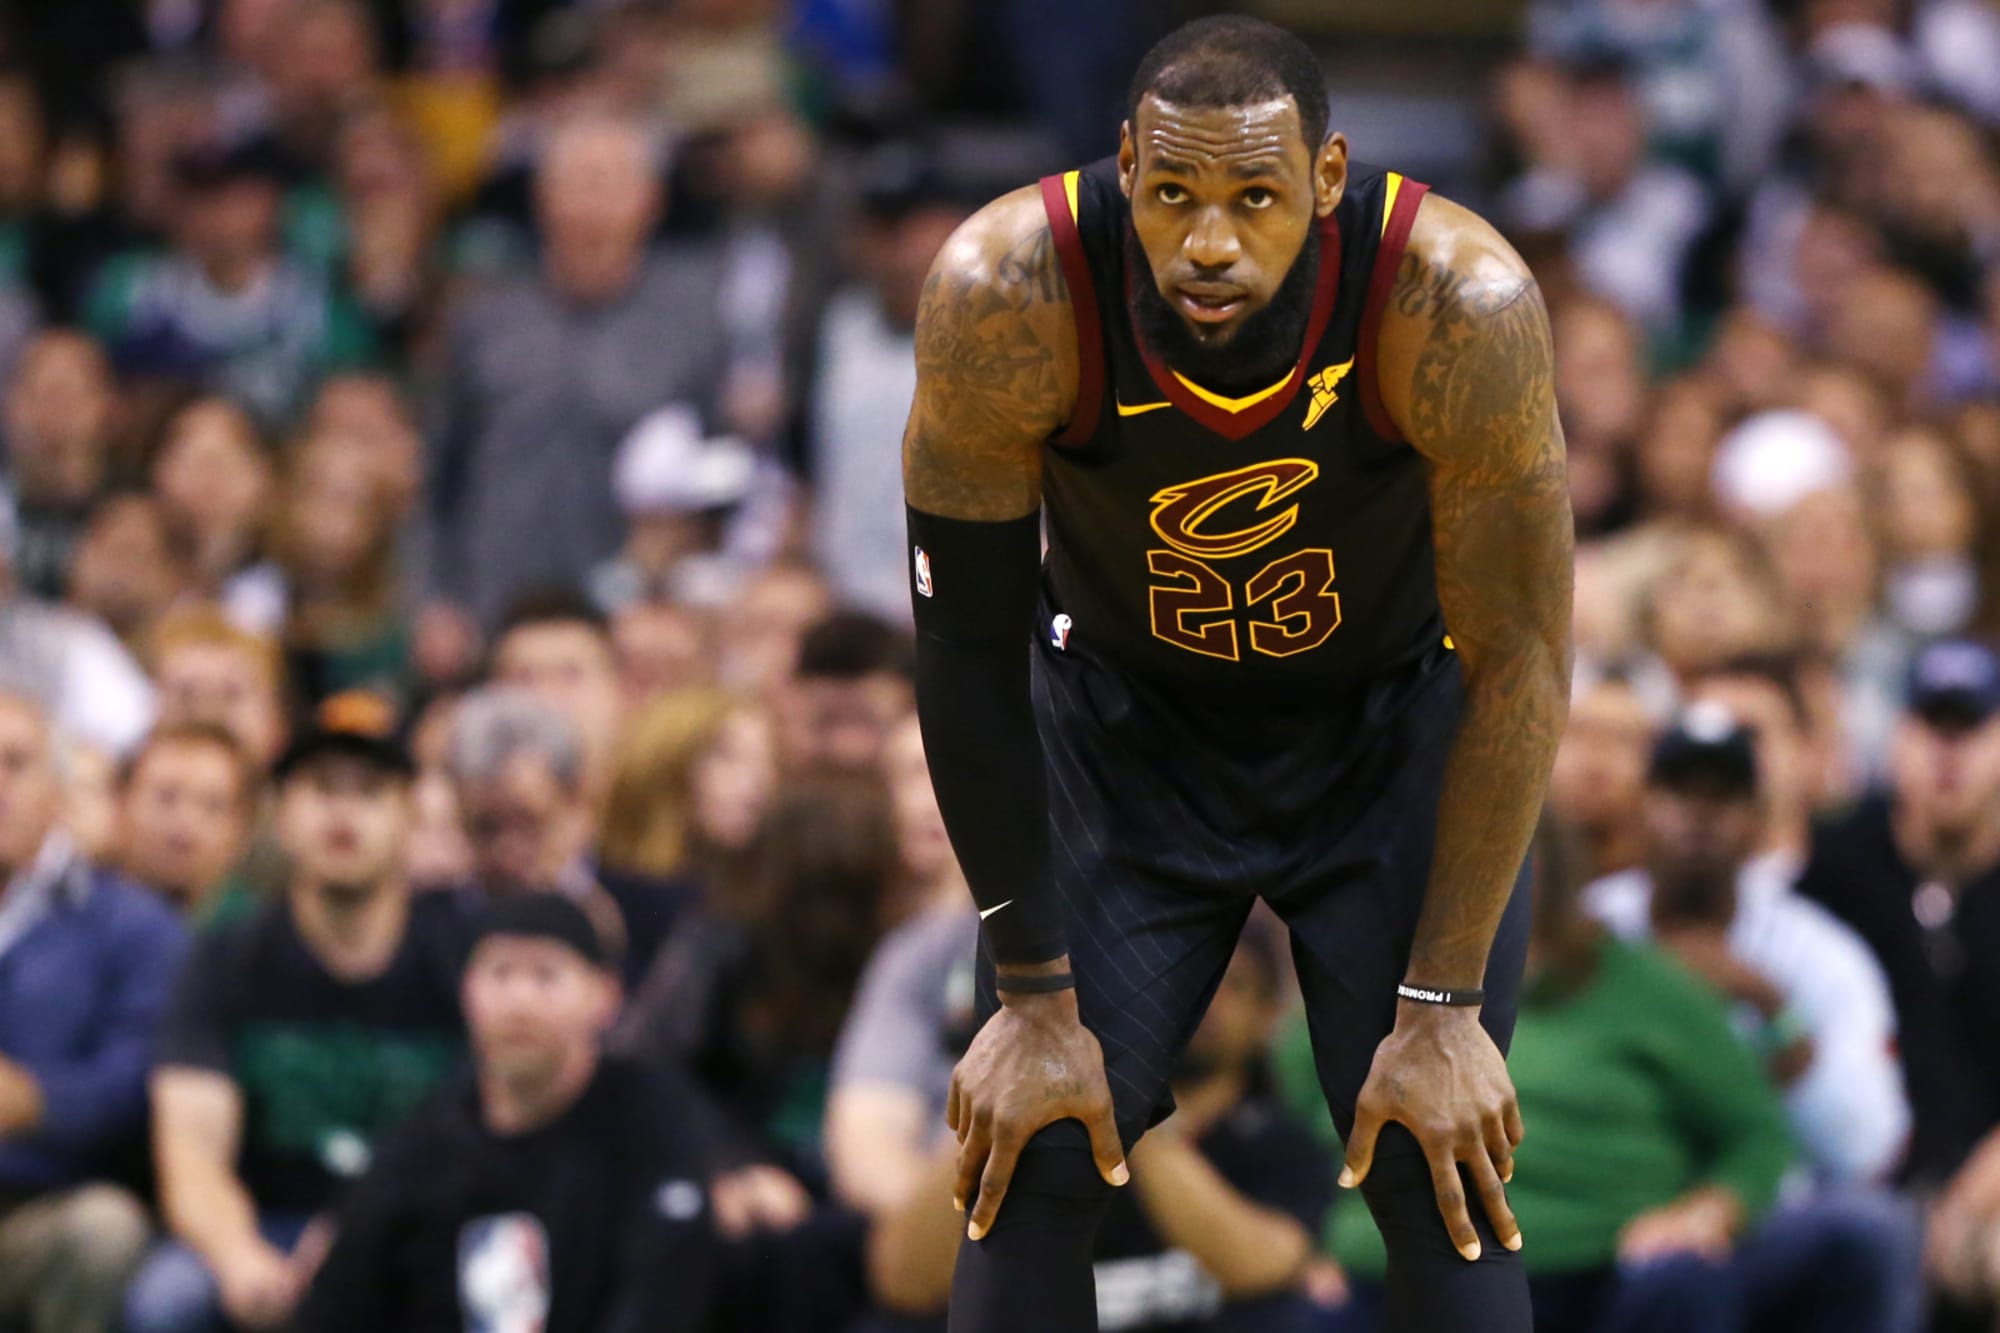 LeBron James is giving the greatest NBA Finals performance in